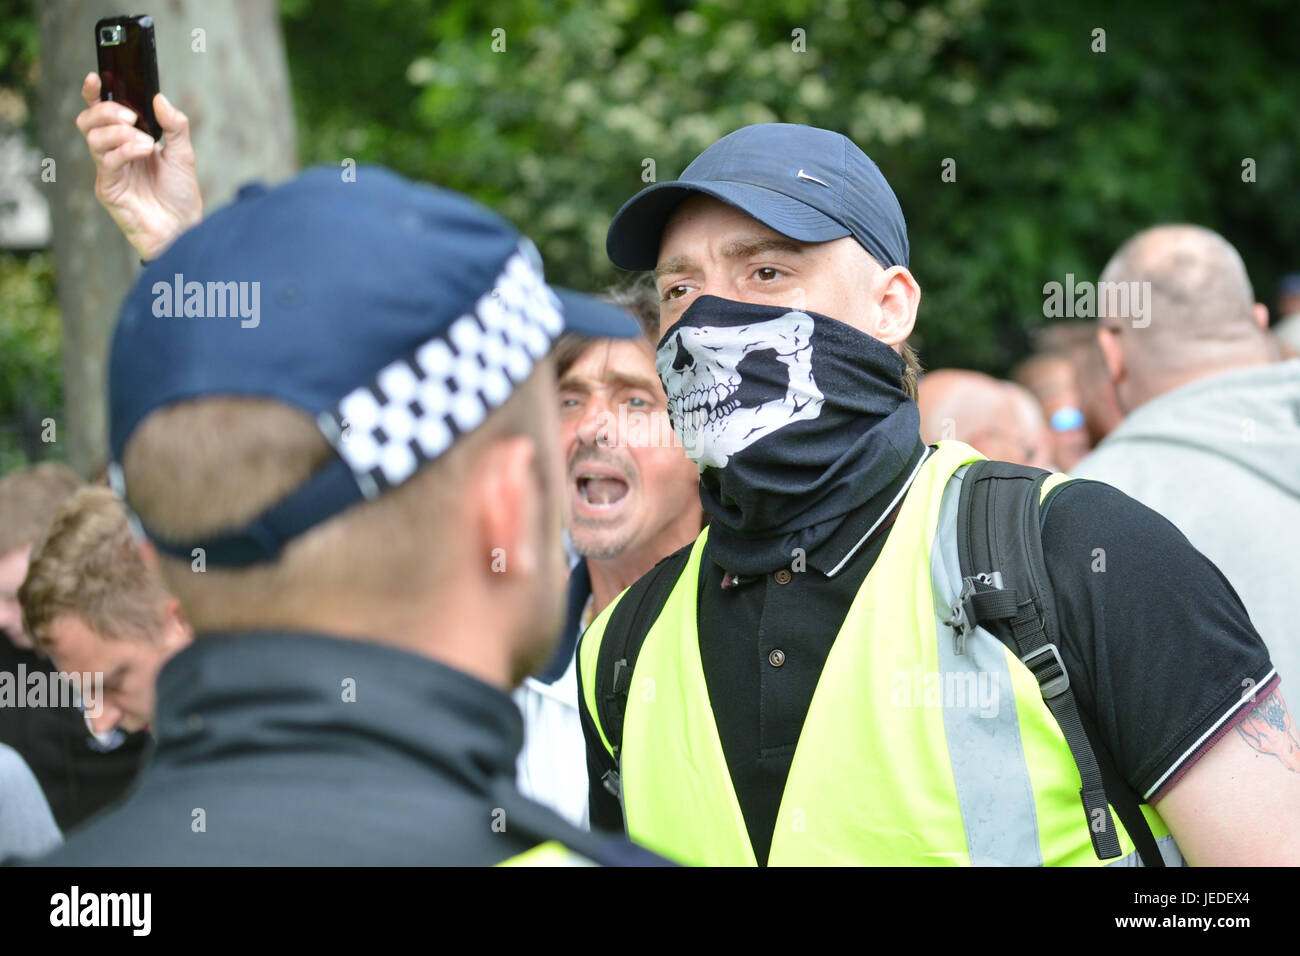 Westminster, London, UK. 24th June, 2017. The EDL march in central London is heavily policed against a counter demo by the UAF. Credit: Matthew Chattle/Alamy Live News Stock Photo